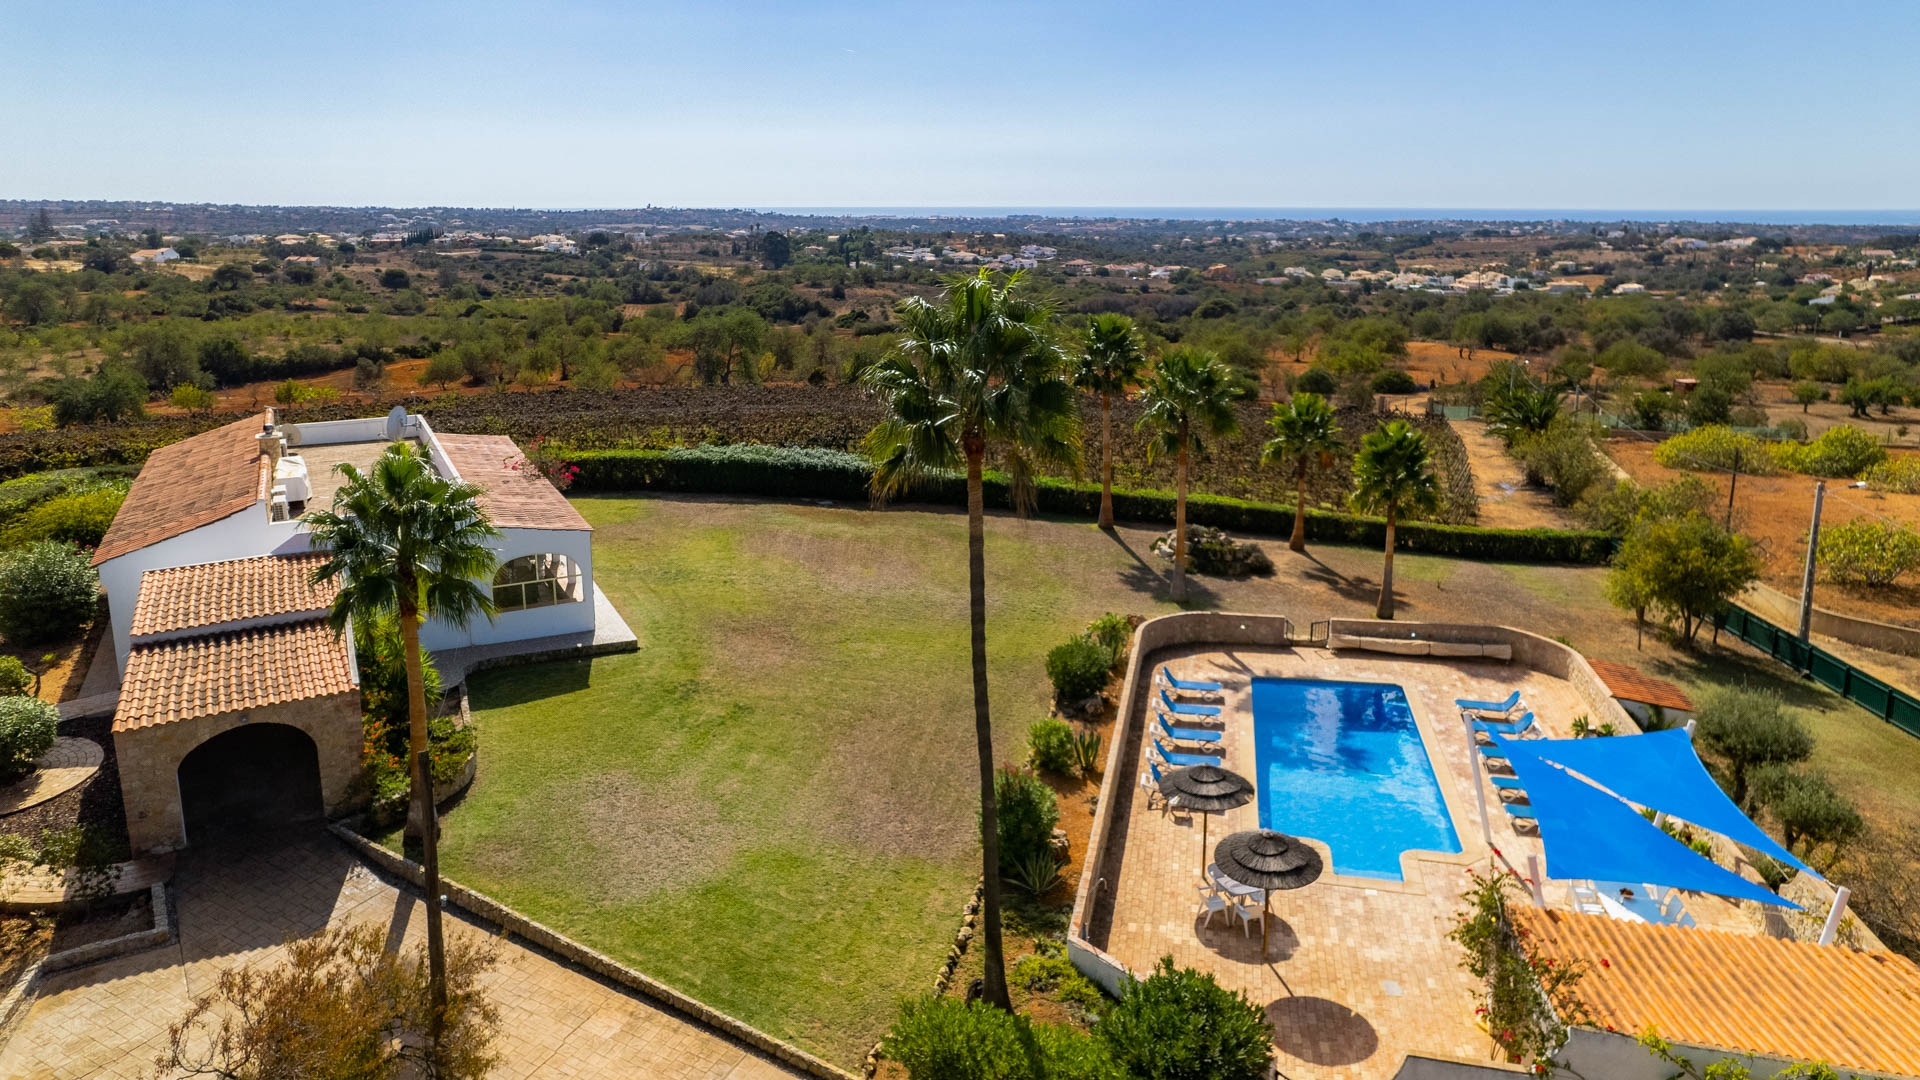 4 Bedroom Sea View Villa with incredible Views surrounded by Vineyards, Guia | VM1984 This villa has been recently refurbished and is submerged into the surrounding vineyards. The large plot offers privacy and a view over the landscape and the sea.